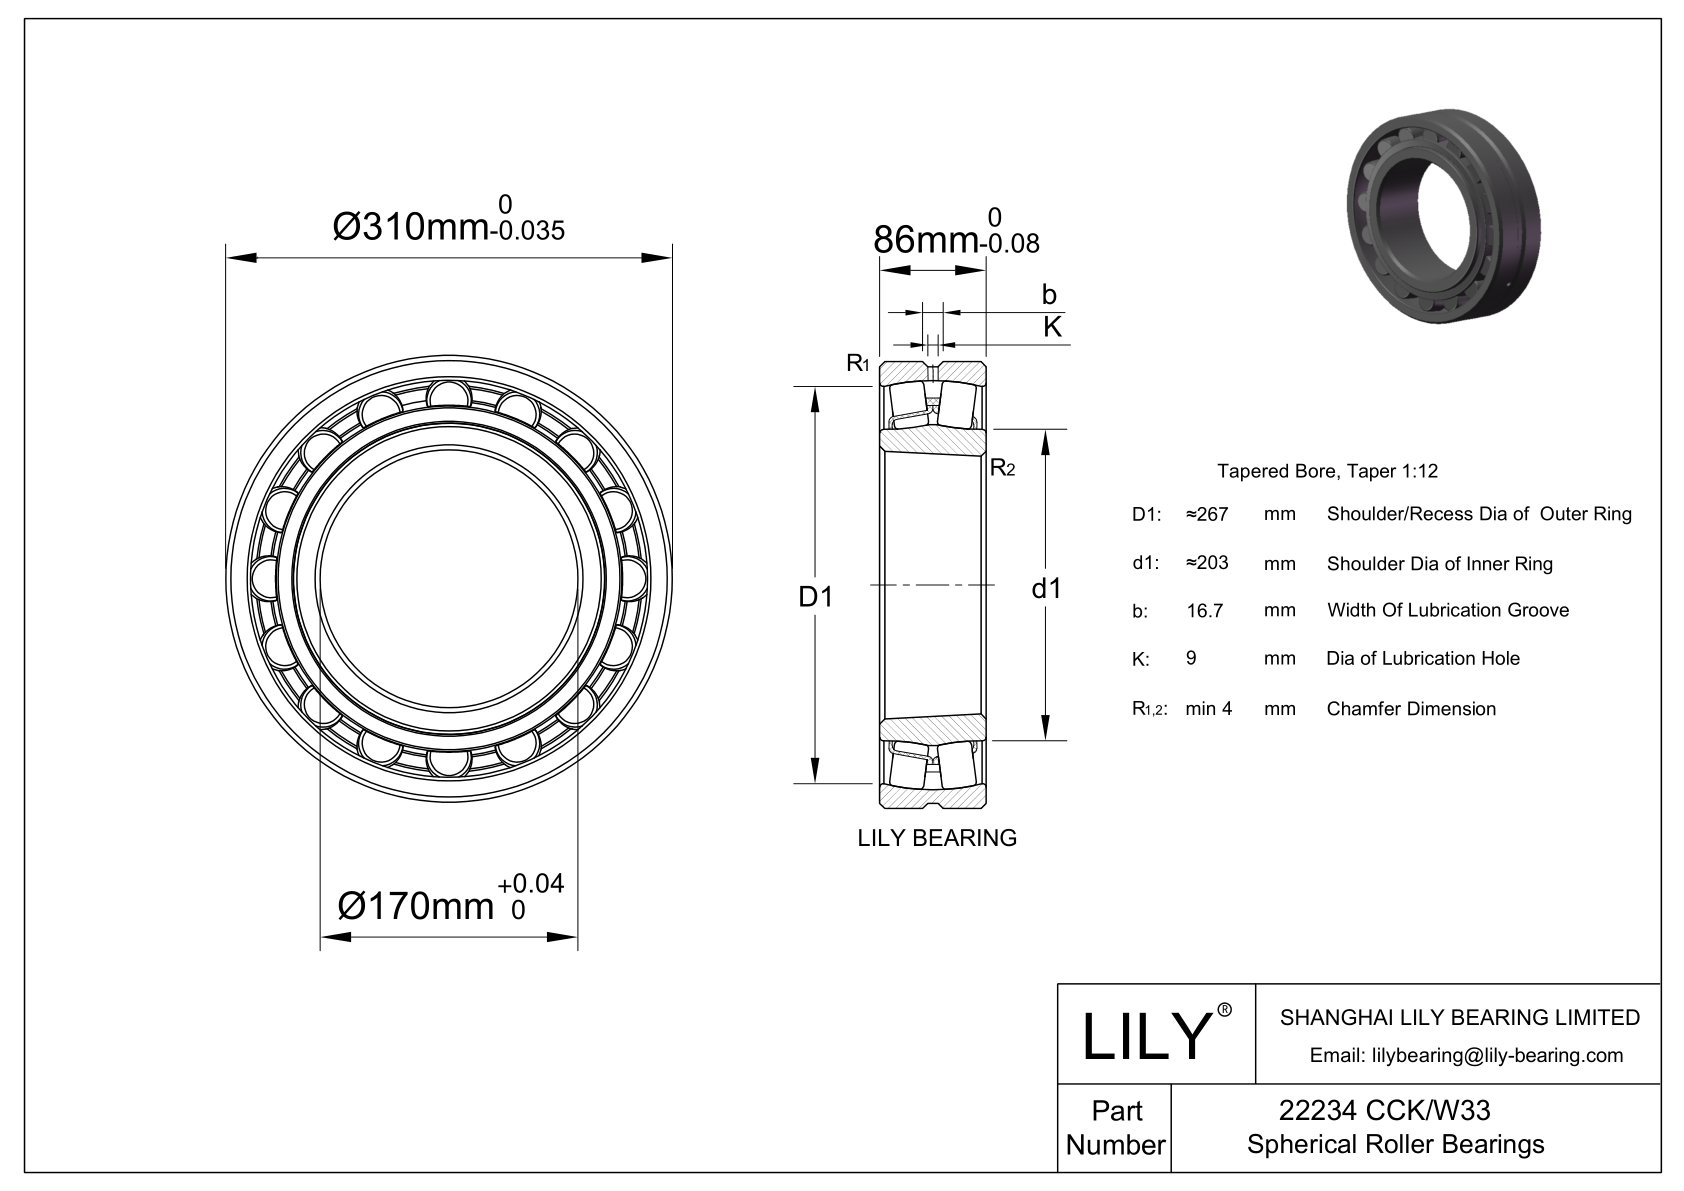 22234 CCK/W33 Double Row Spherical Roller Bearing cad drawing